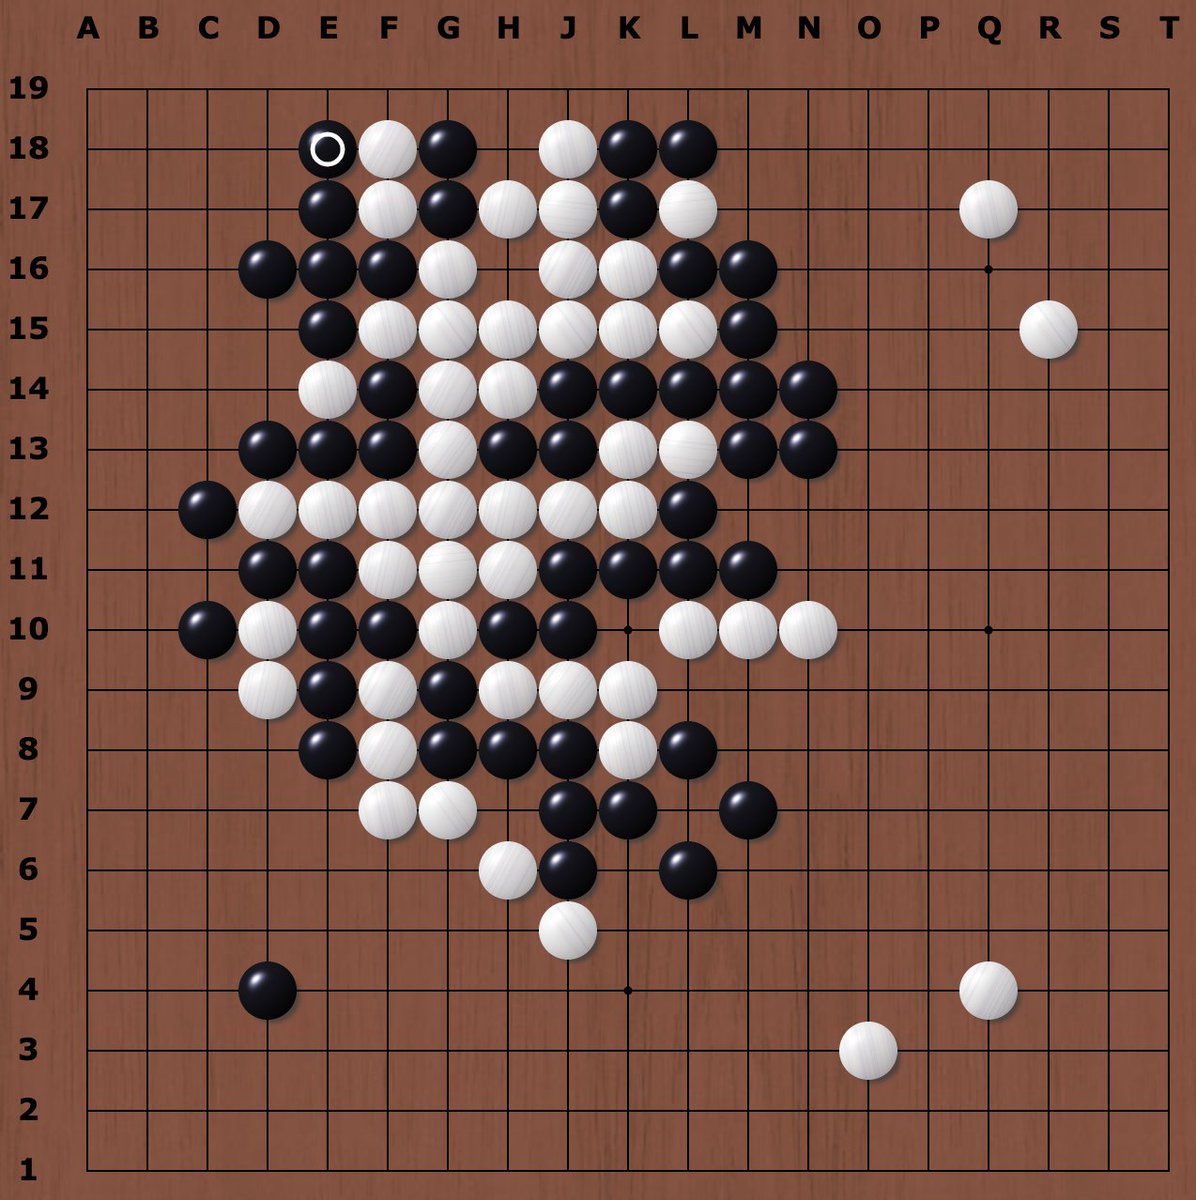 A finished Go game with the final move marked.